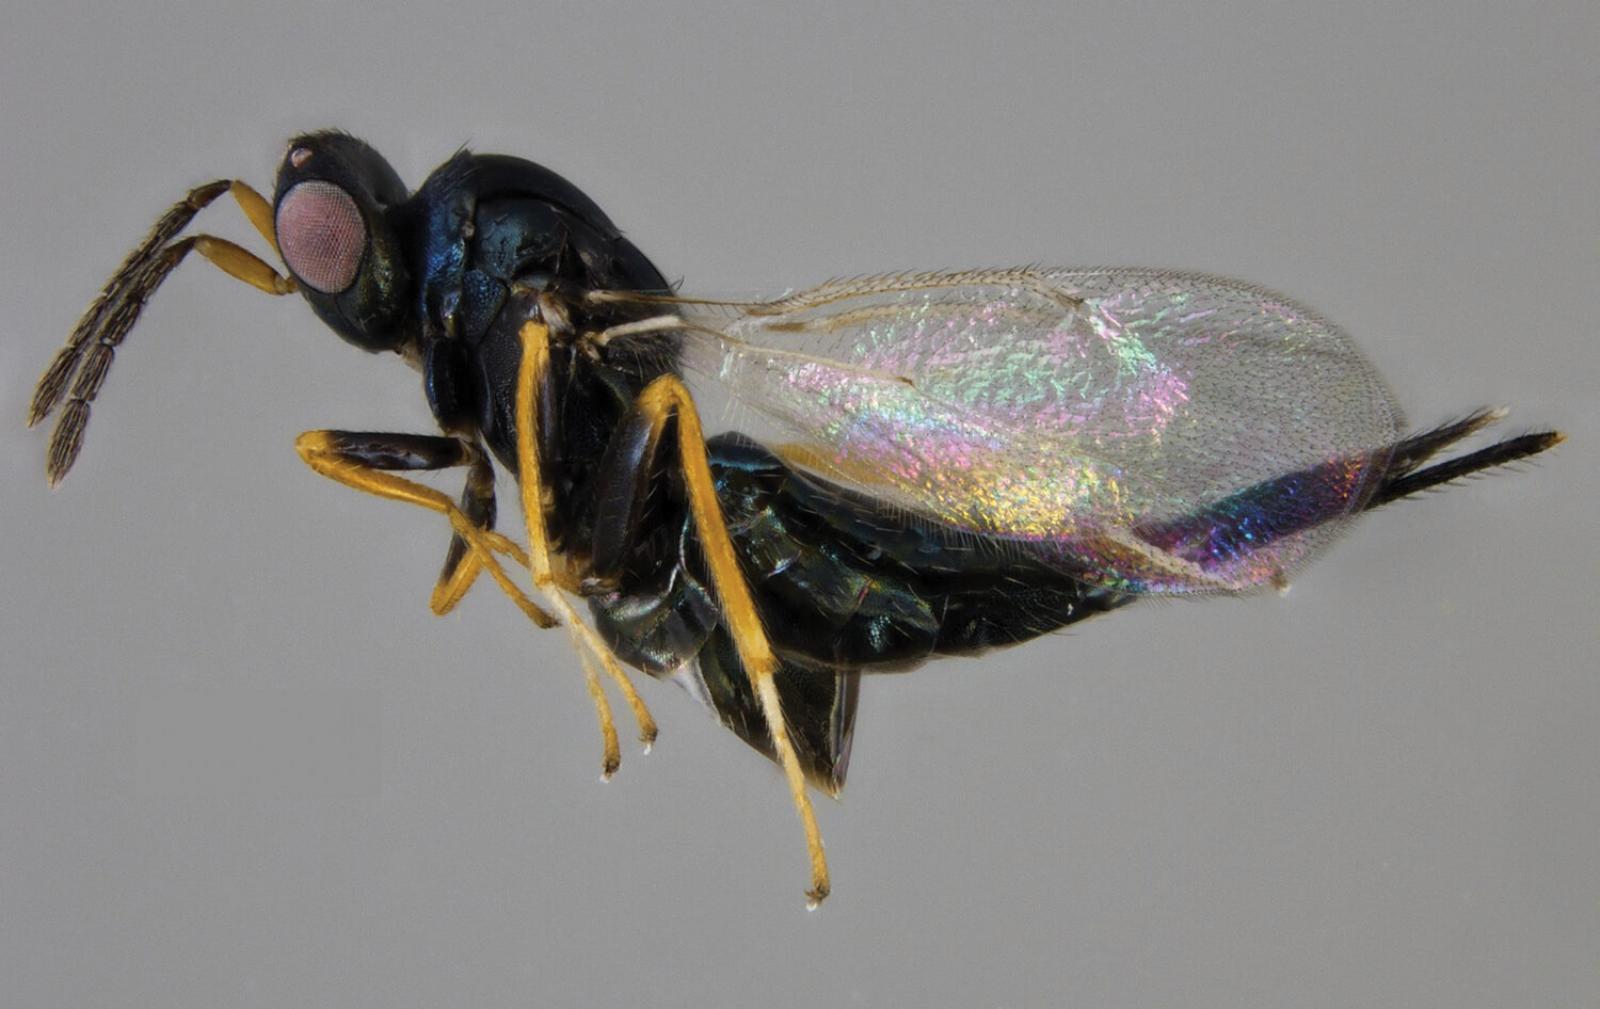 A female parasitic wasp.